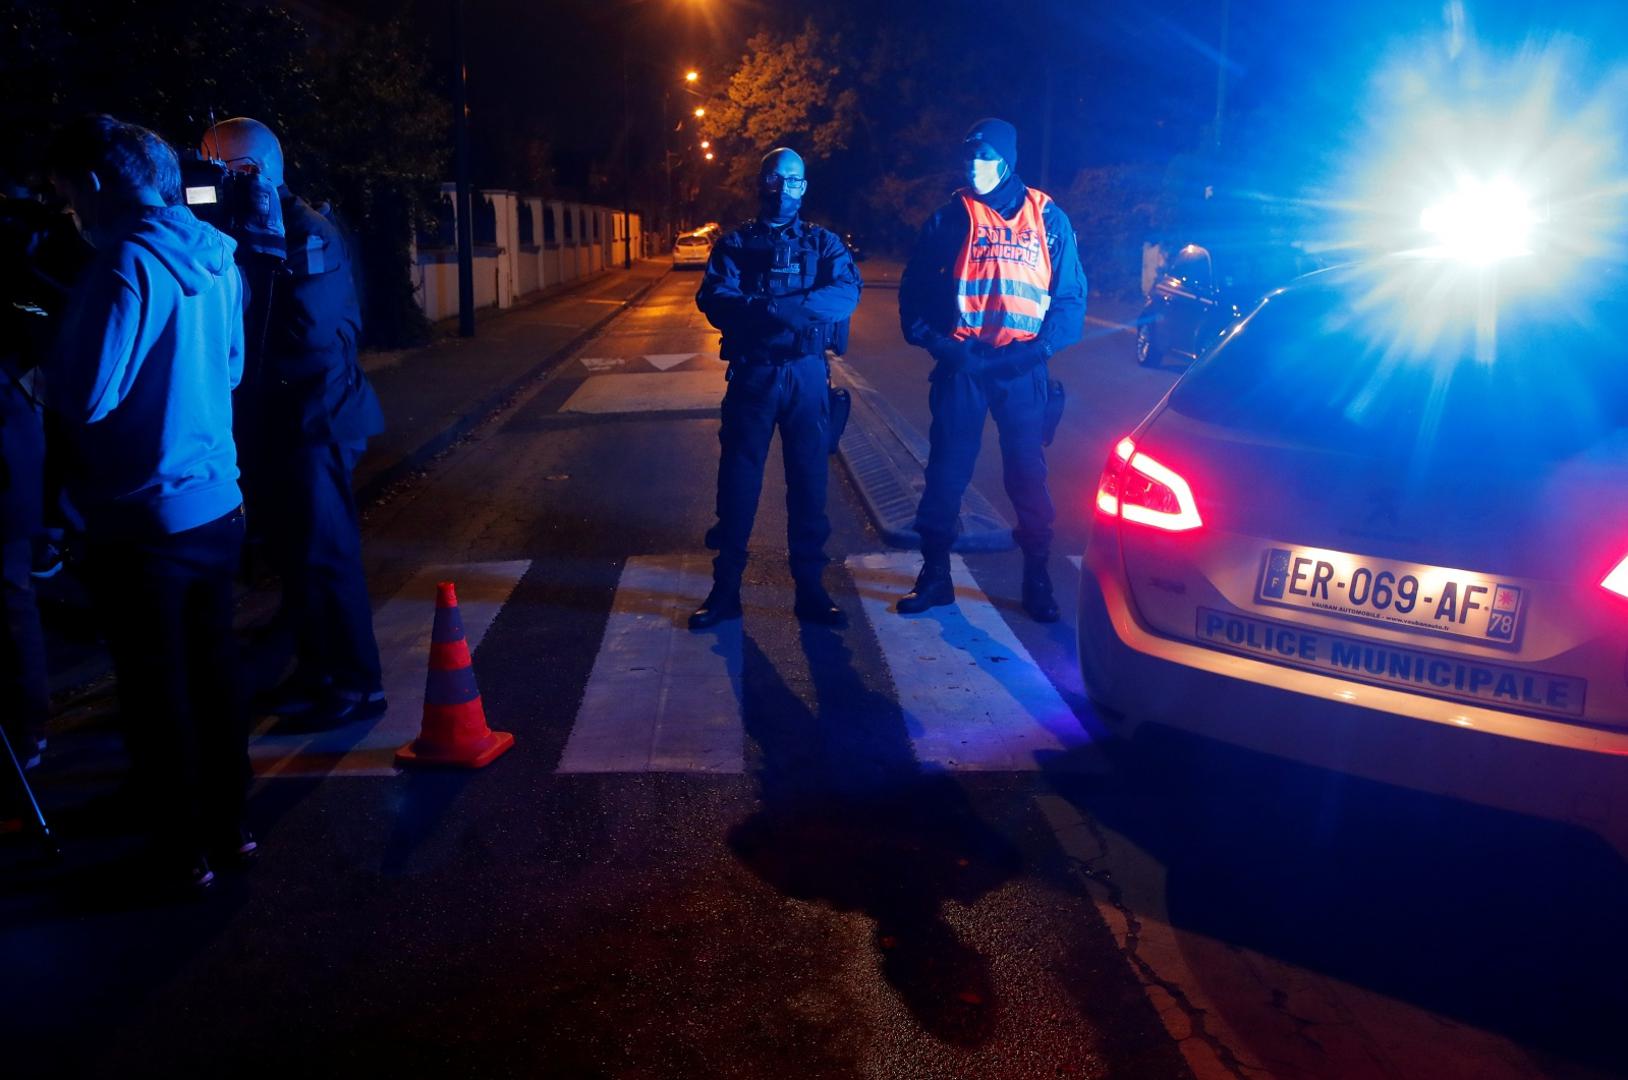 Stabbing attack in the Paris suburb of Conflans St Honorine Police officers secure the area near the scene of a stabbing attack in the Paris suburb of Conflans St Honorine, France, October 16, 2020. REUTERS/Charles Platiau CHARLES PLATIAU